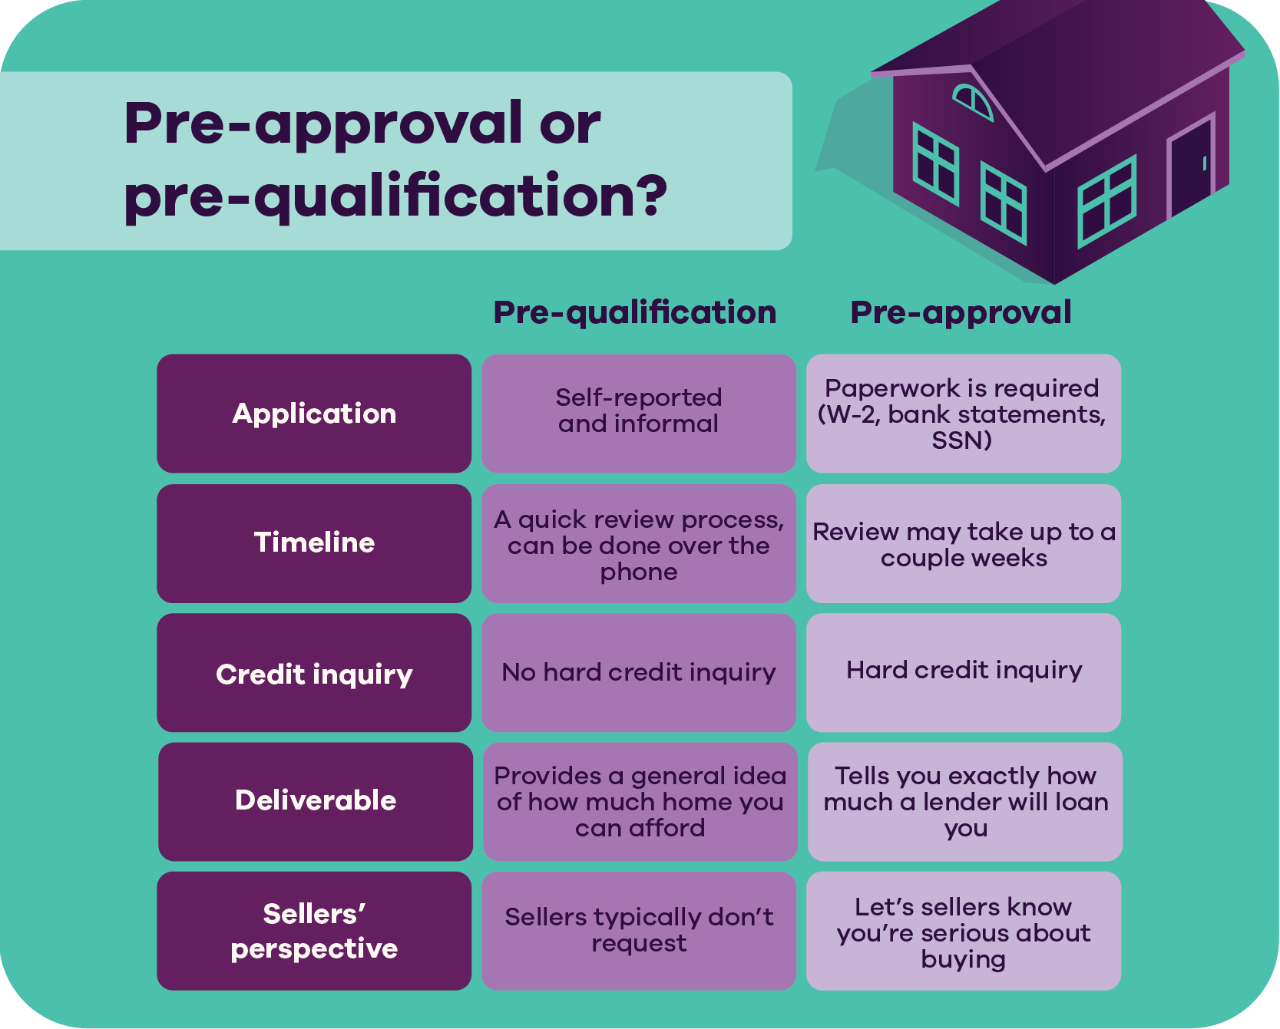 Pre-approval or pre-qualification? For pre-qualification, the application is self-reported and informal, it’s a quick review process that can be done over the phone, there’s no hard credit inquiry, it provides a general idea of how much home you can afford, and sellers typically don’t request it. As far as a pre-approval, paperwork is required (perhaps a W-2, bank statements or a social security number), the review may take up to a couple of weeks, there’s a hard credit inquiry, it’s tells you exactly how much a lender will loan you, and it lets sellers know you’re serious about buying.